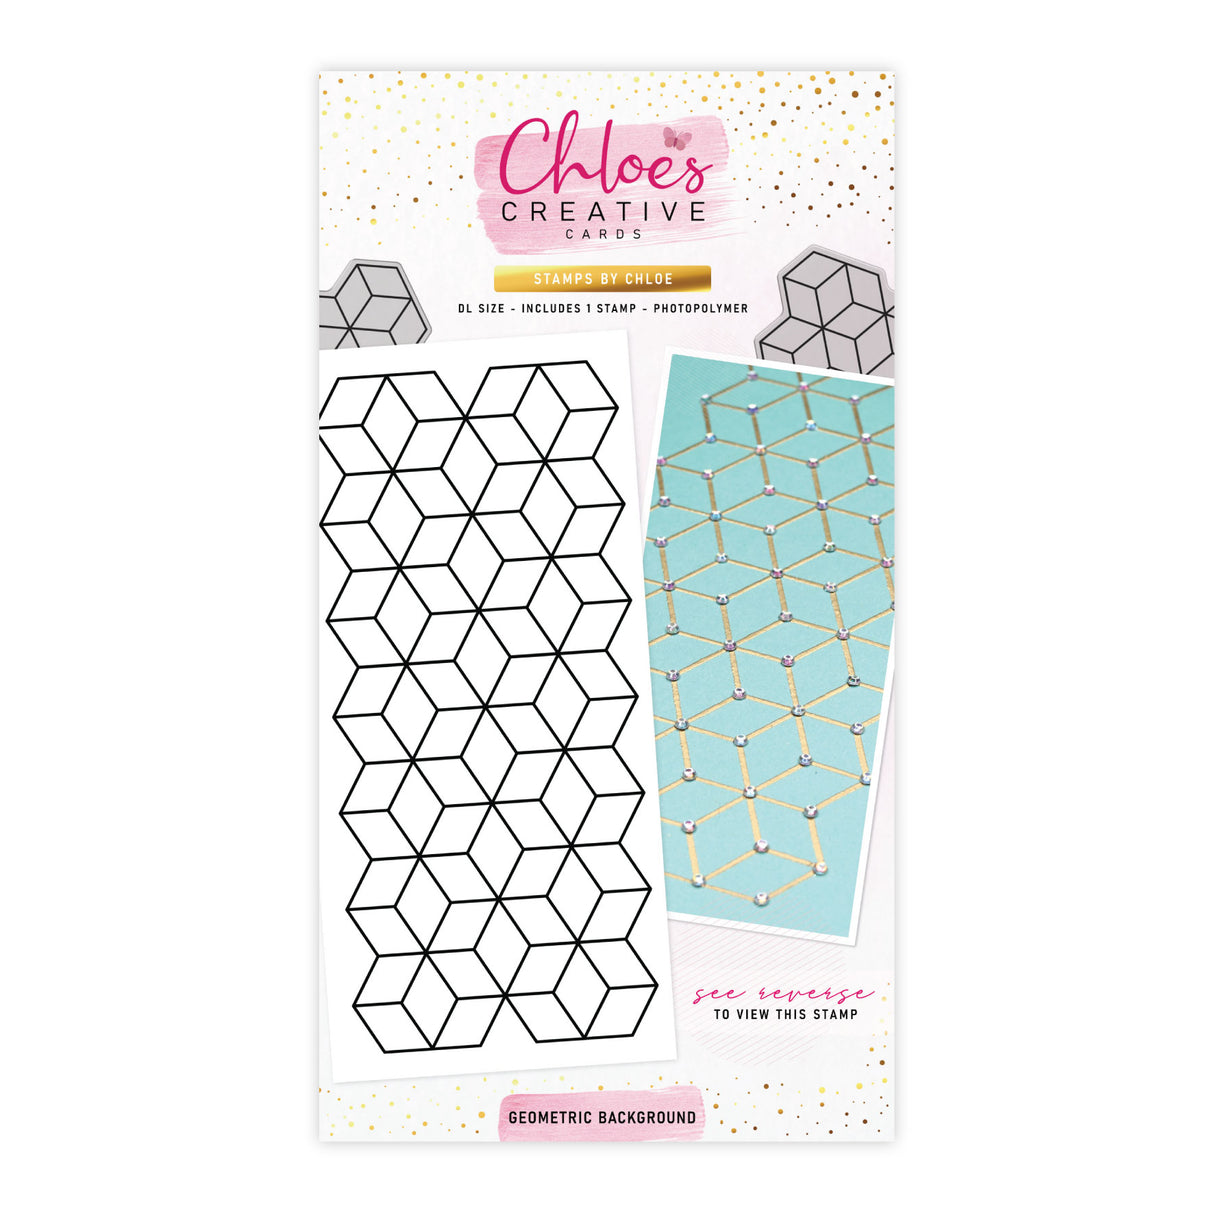 Chloes Creative Cards Photopolymer Stamp Set (DL) - Geometric Background